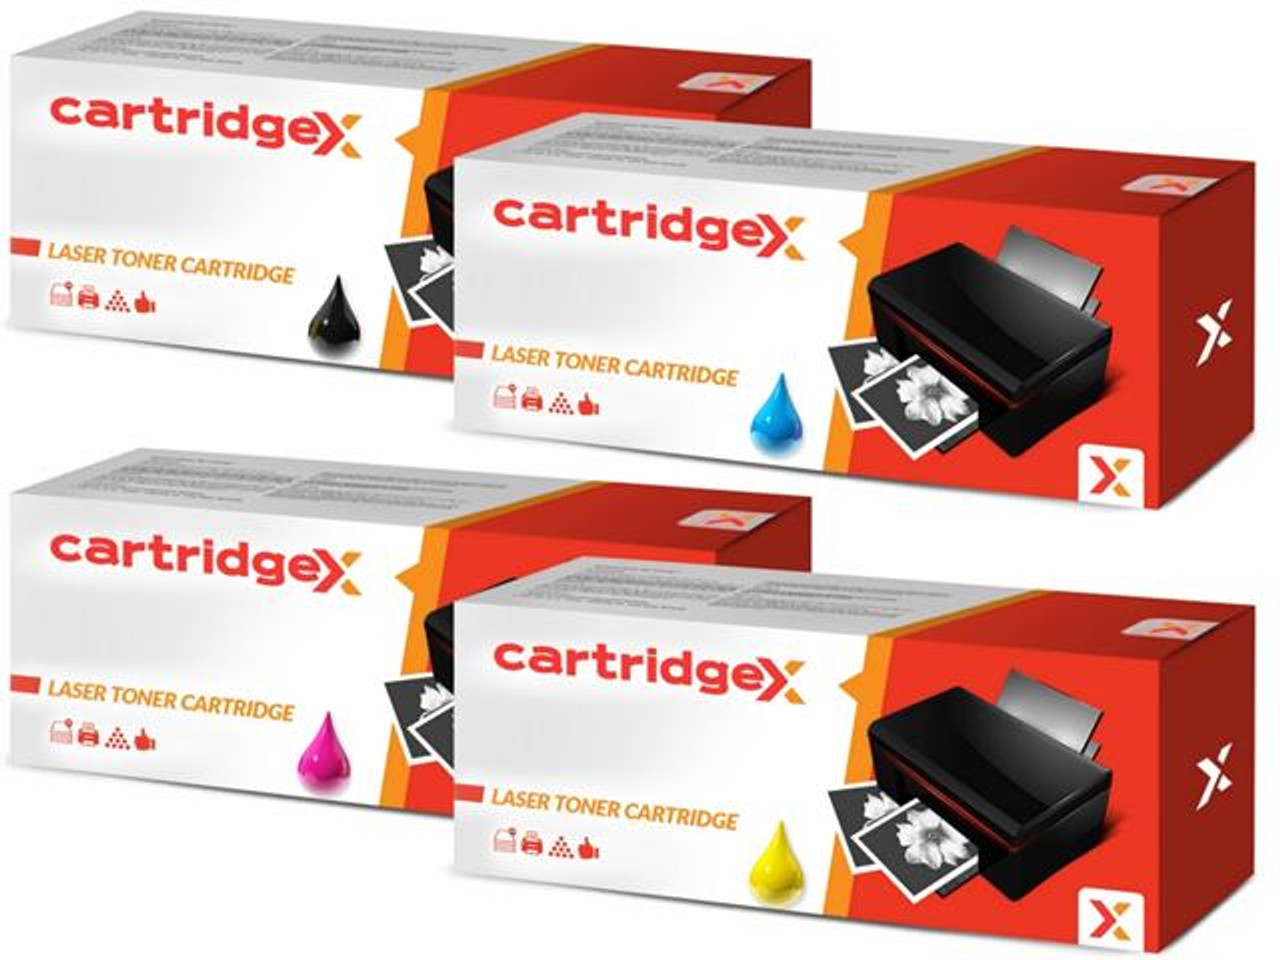 Compatible 4 High Yield Toner Cartridge Set For Xerox Phaser 7400 7400n 7400dx